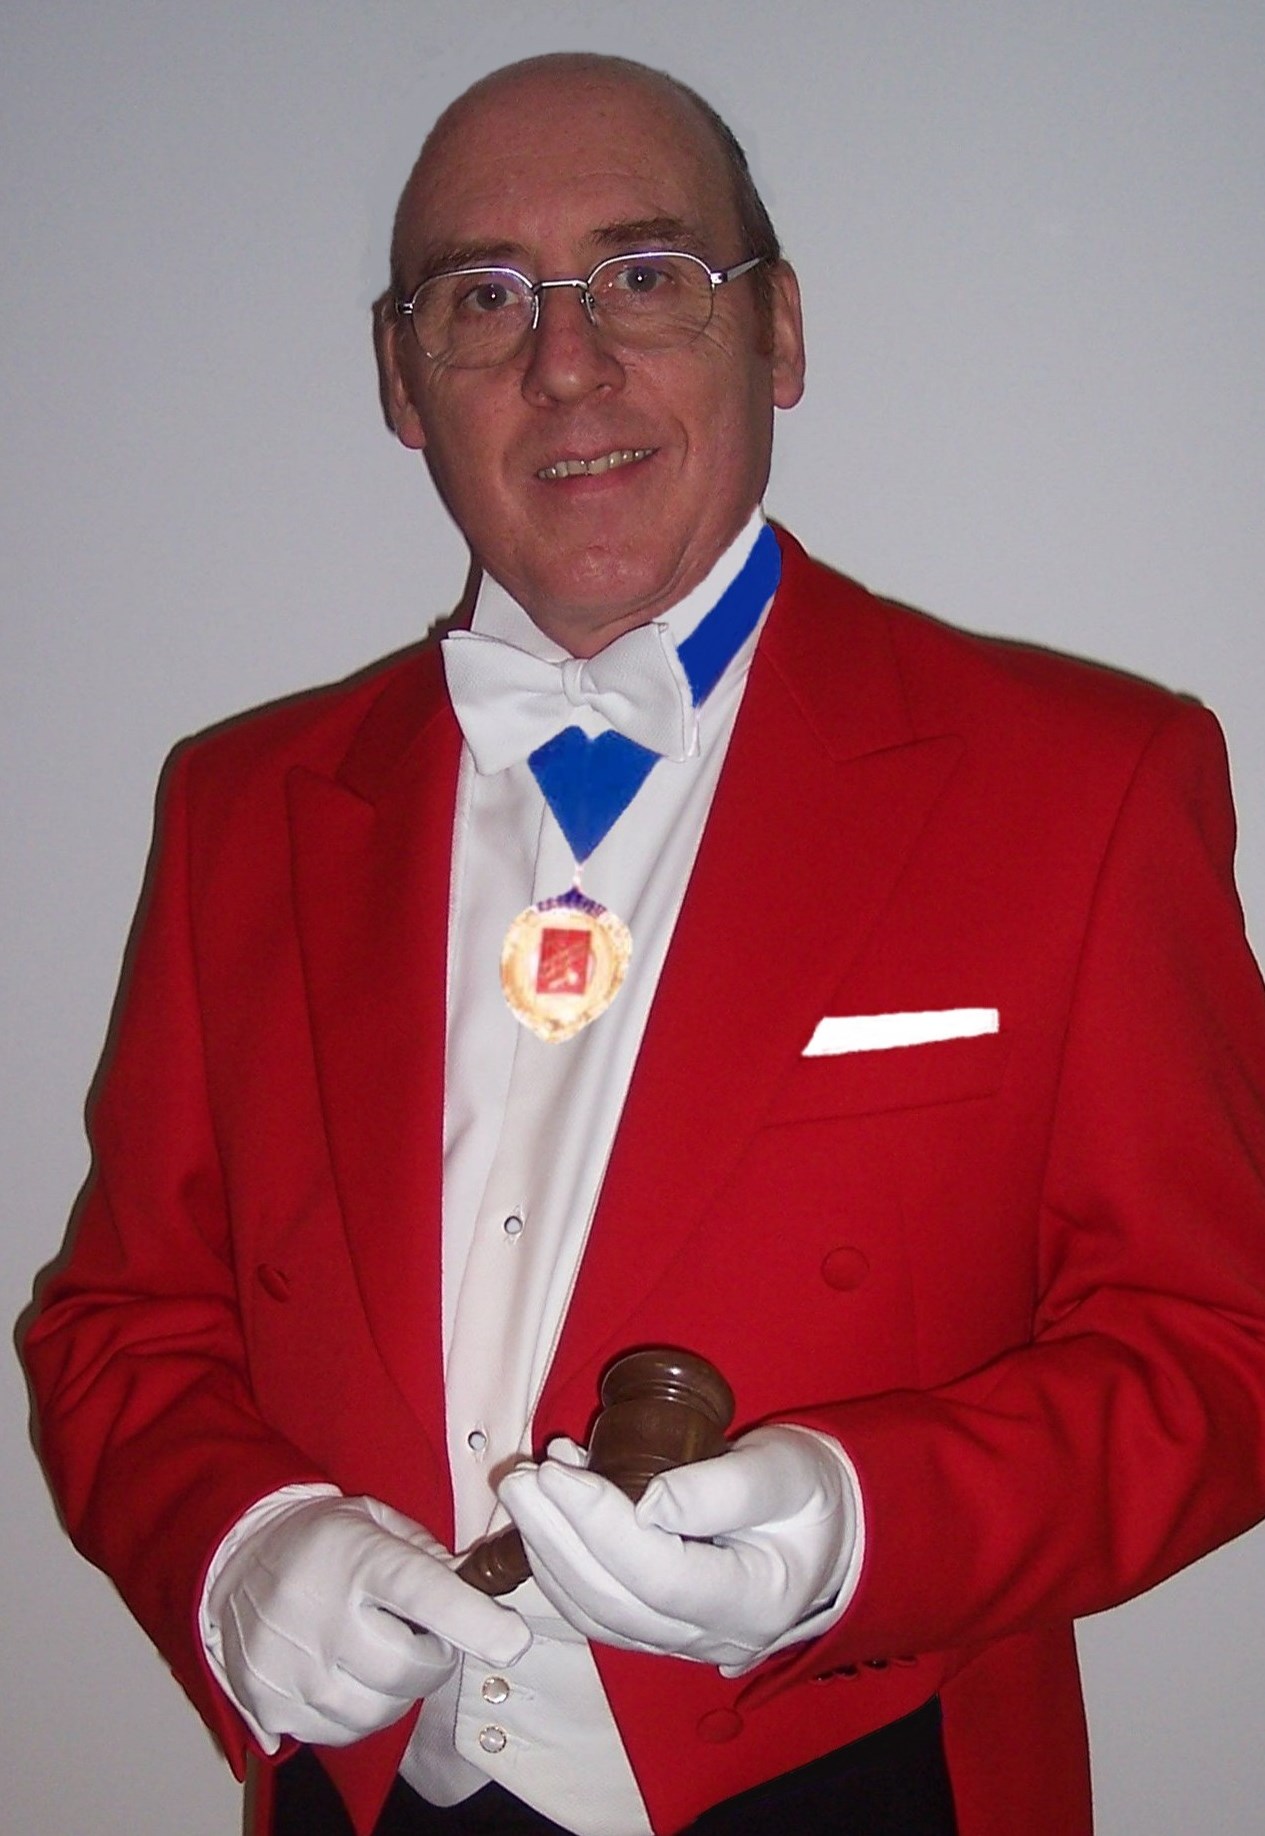 Professional Toastmaster and Master of Ceremonies Hertfordshire - Keith Reading